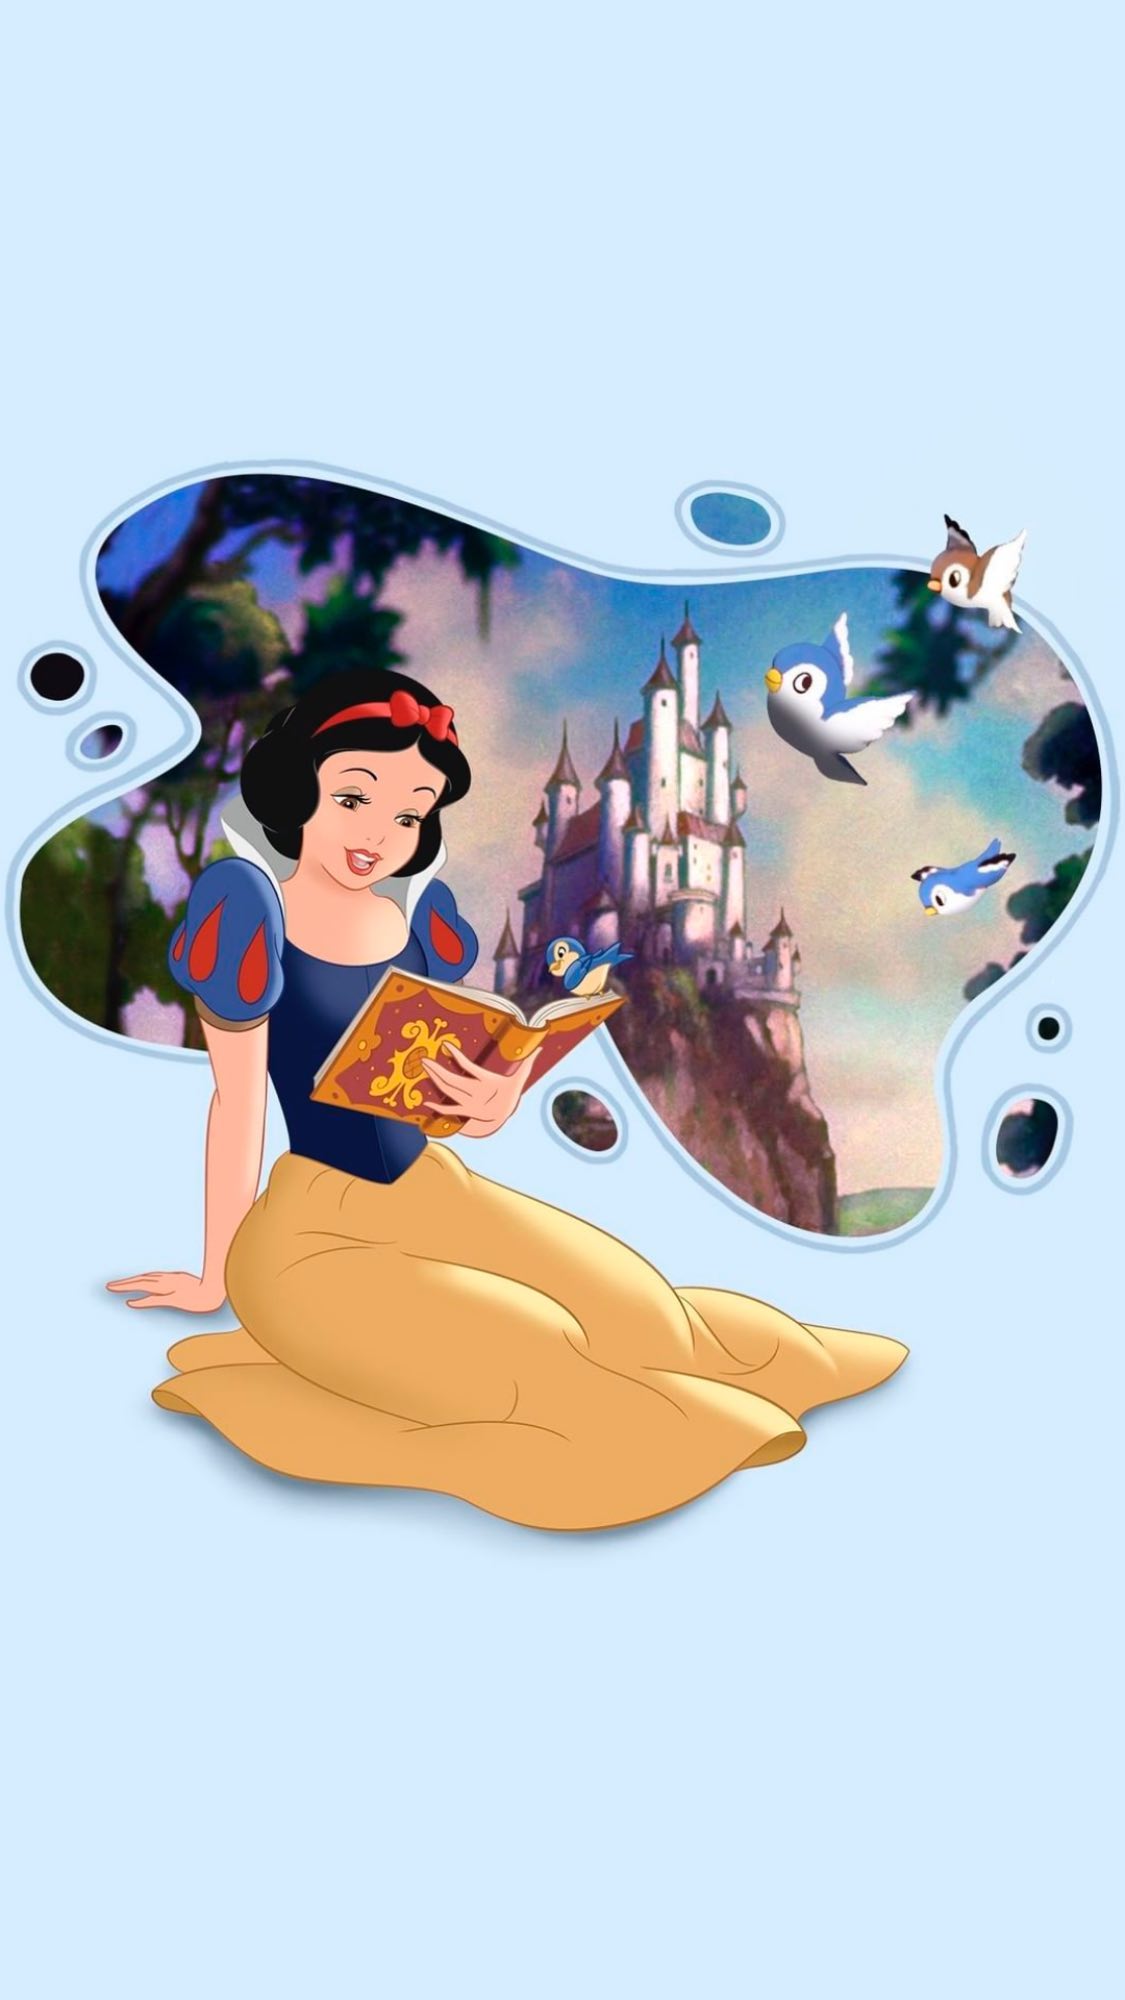 Snow White reading a book in front of her castle - Princess